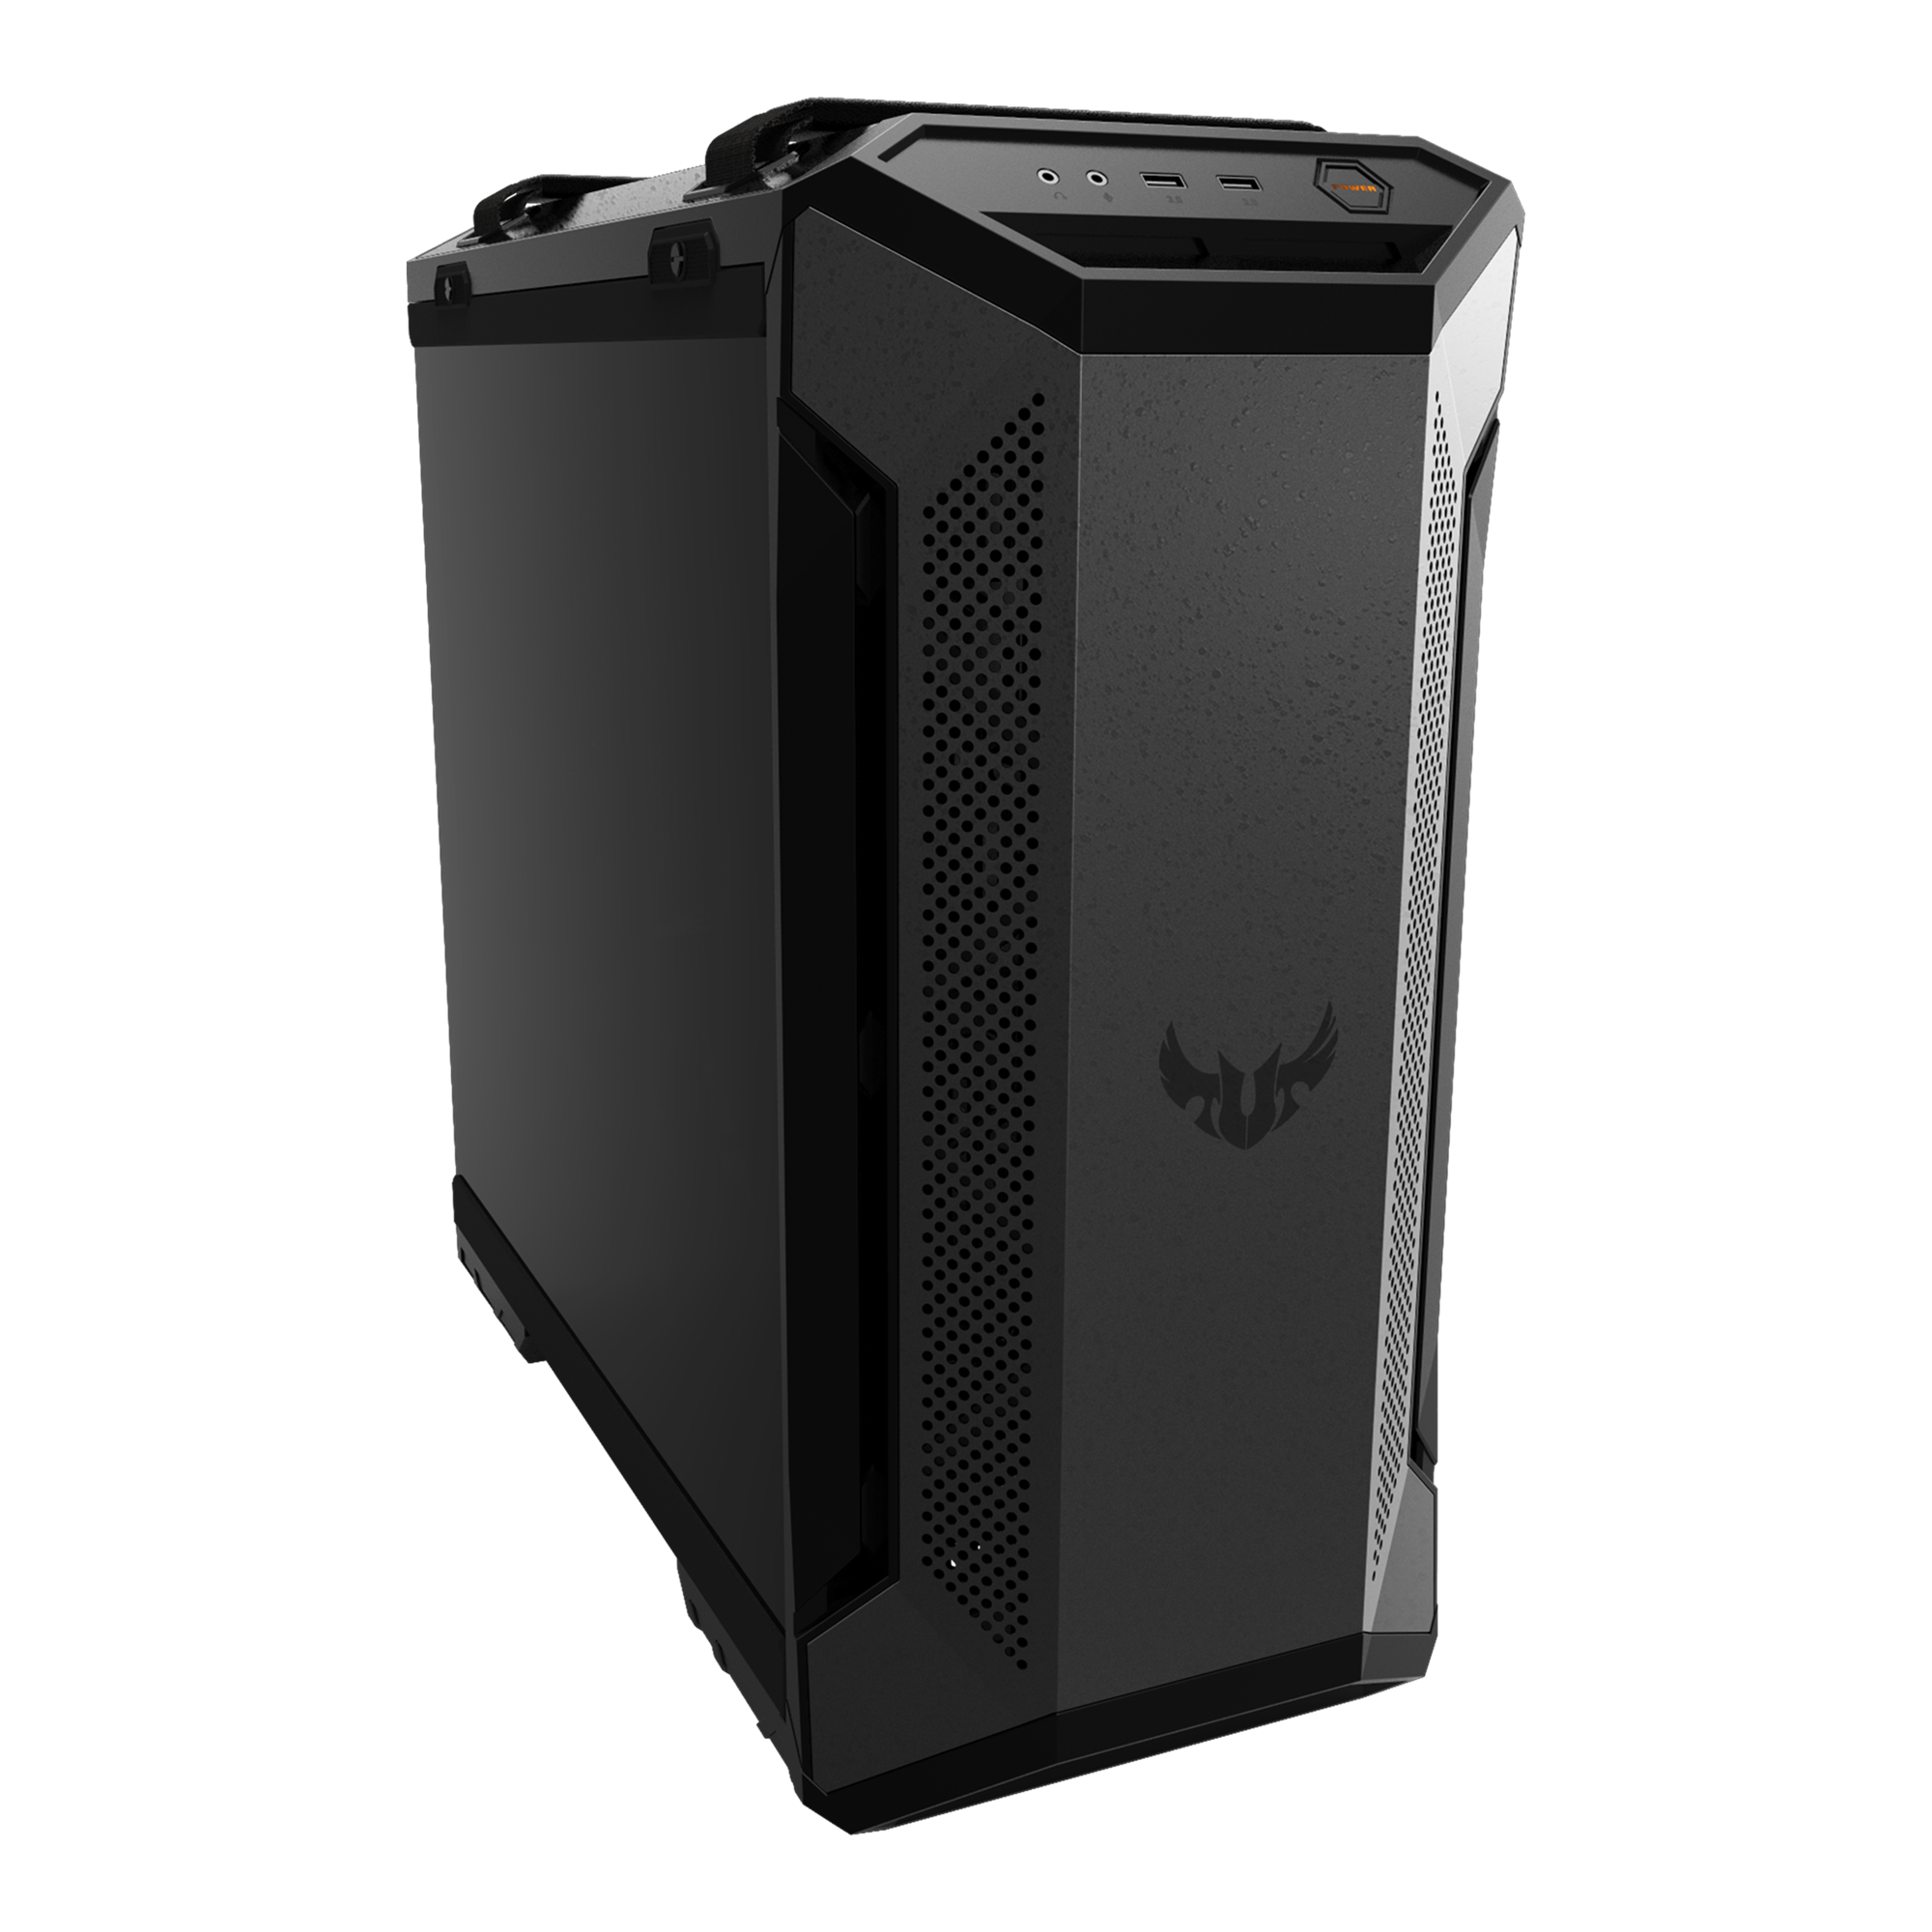 TUF Gaming GT501｜Gaming Case｜ASUS Middle East